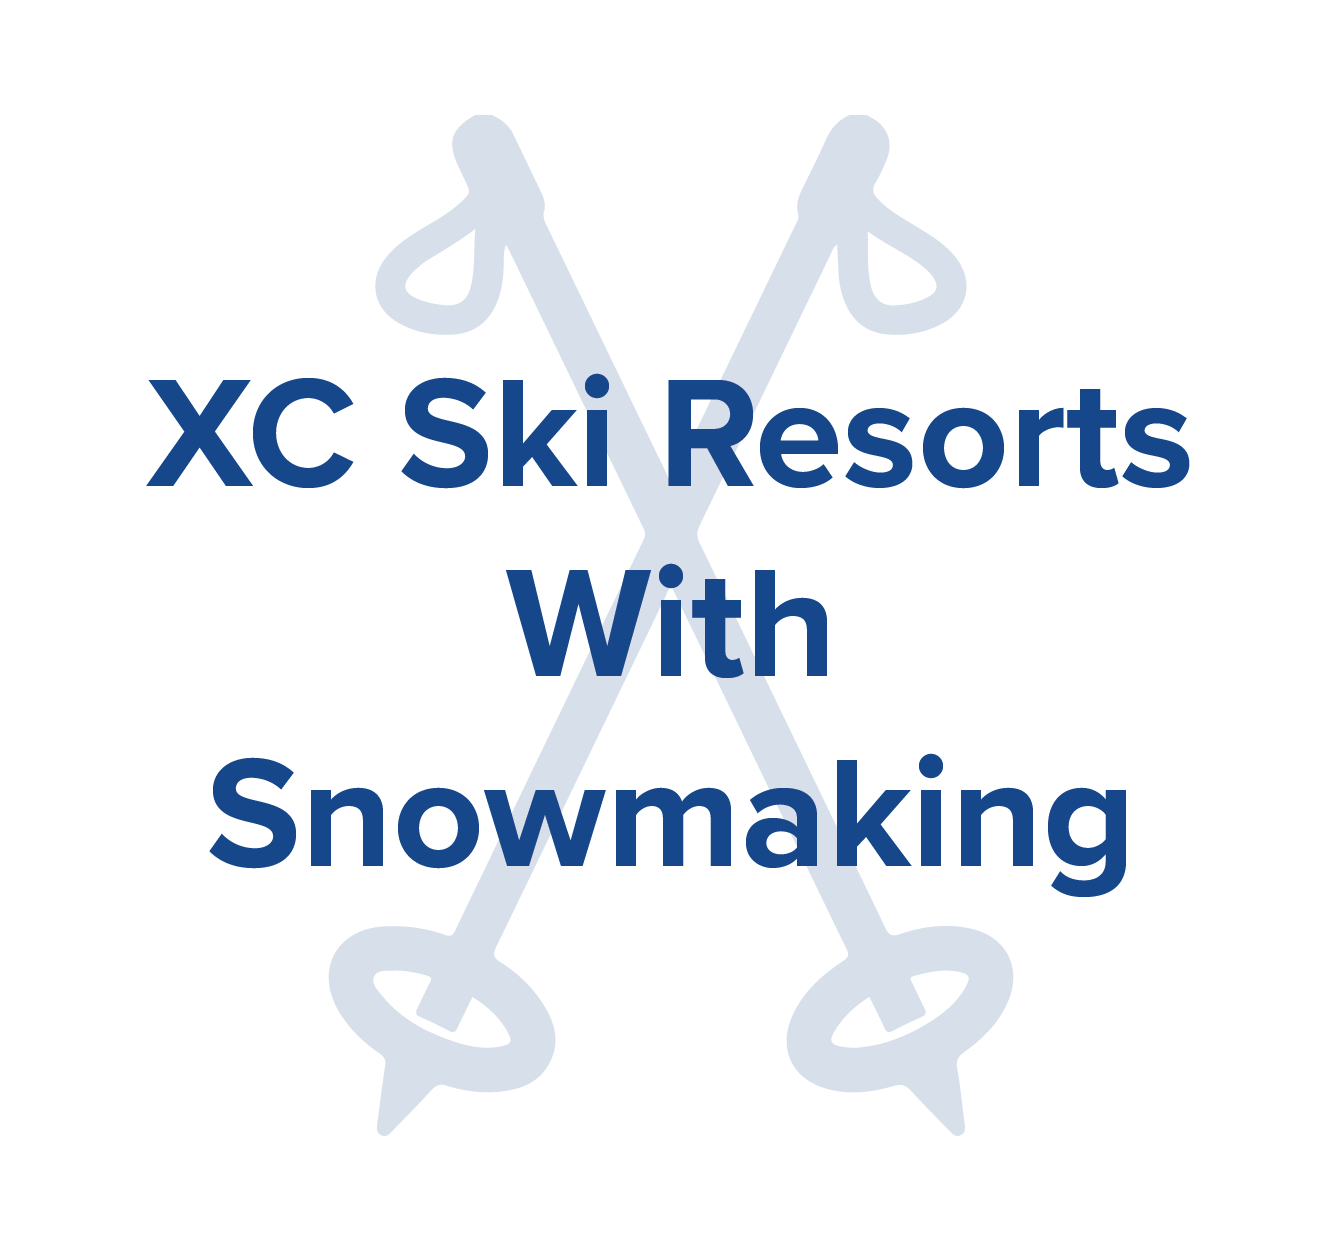 xc ski resorts with snowmaking.png